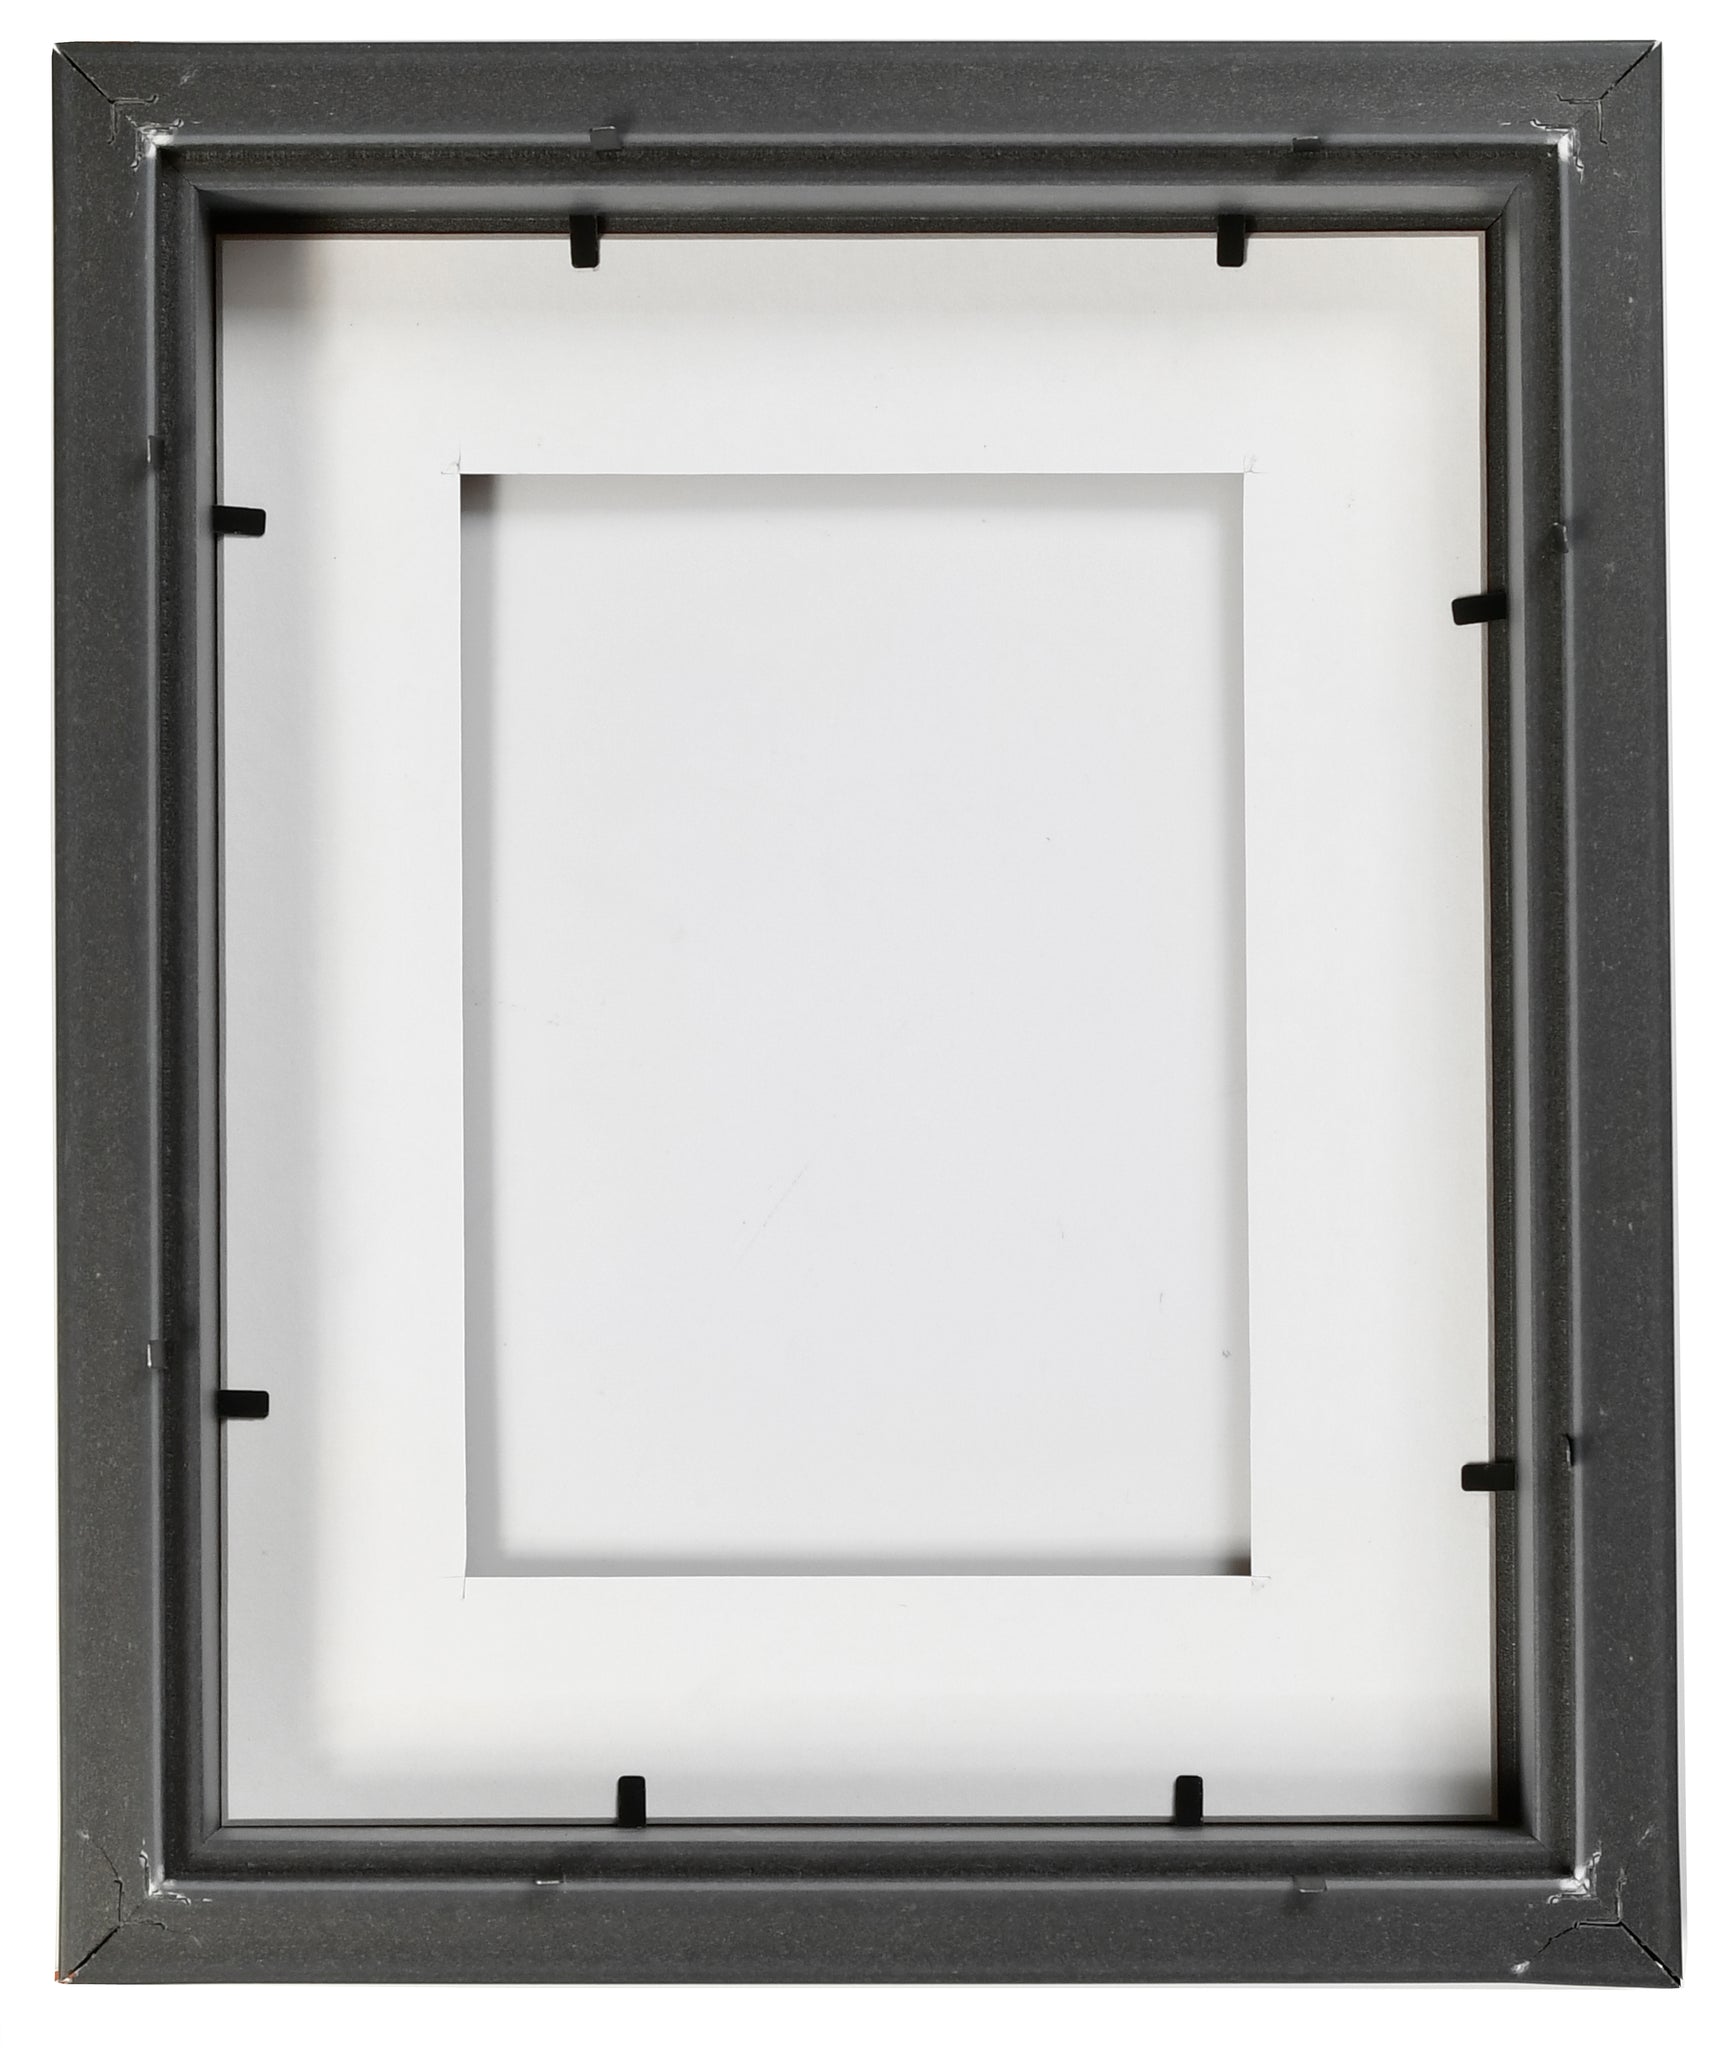 SHADOW BOX FRAME FOR OBJECTS - BLACK FRAME - WHITE MAT - CLEAR GLASS - 1" DEPTH